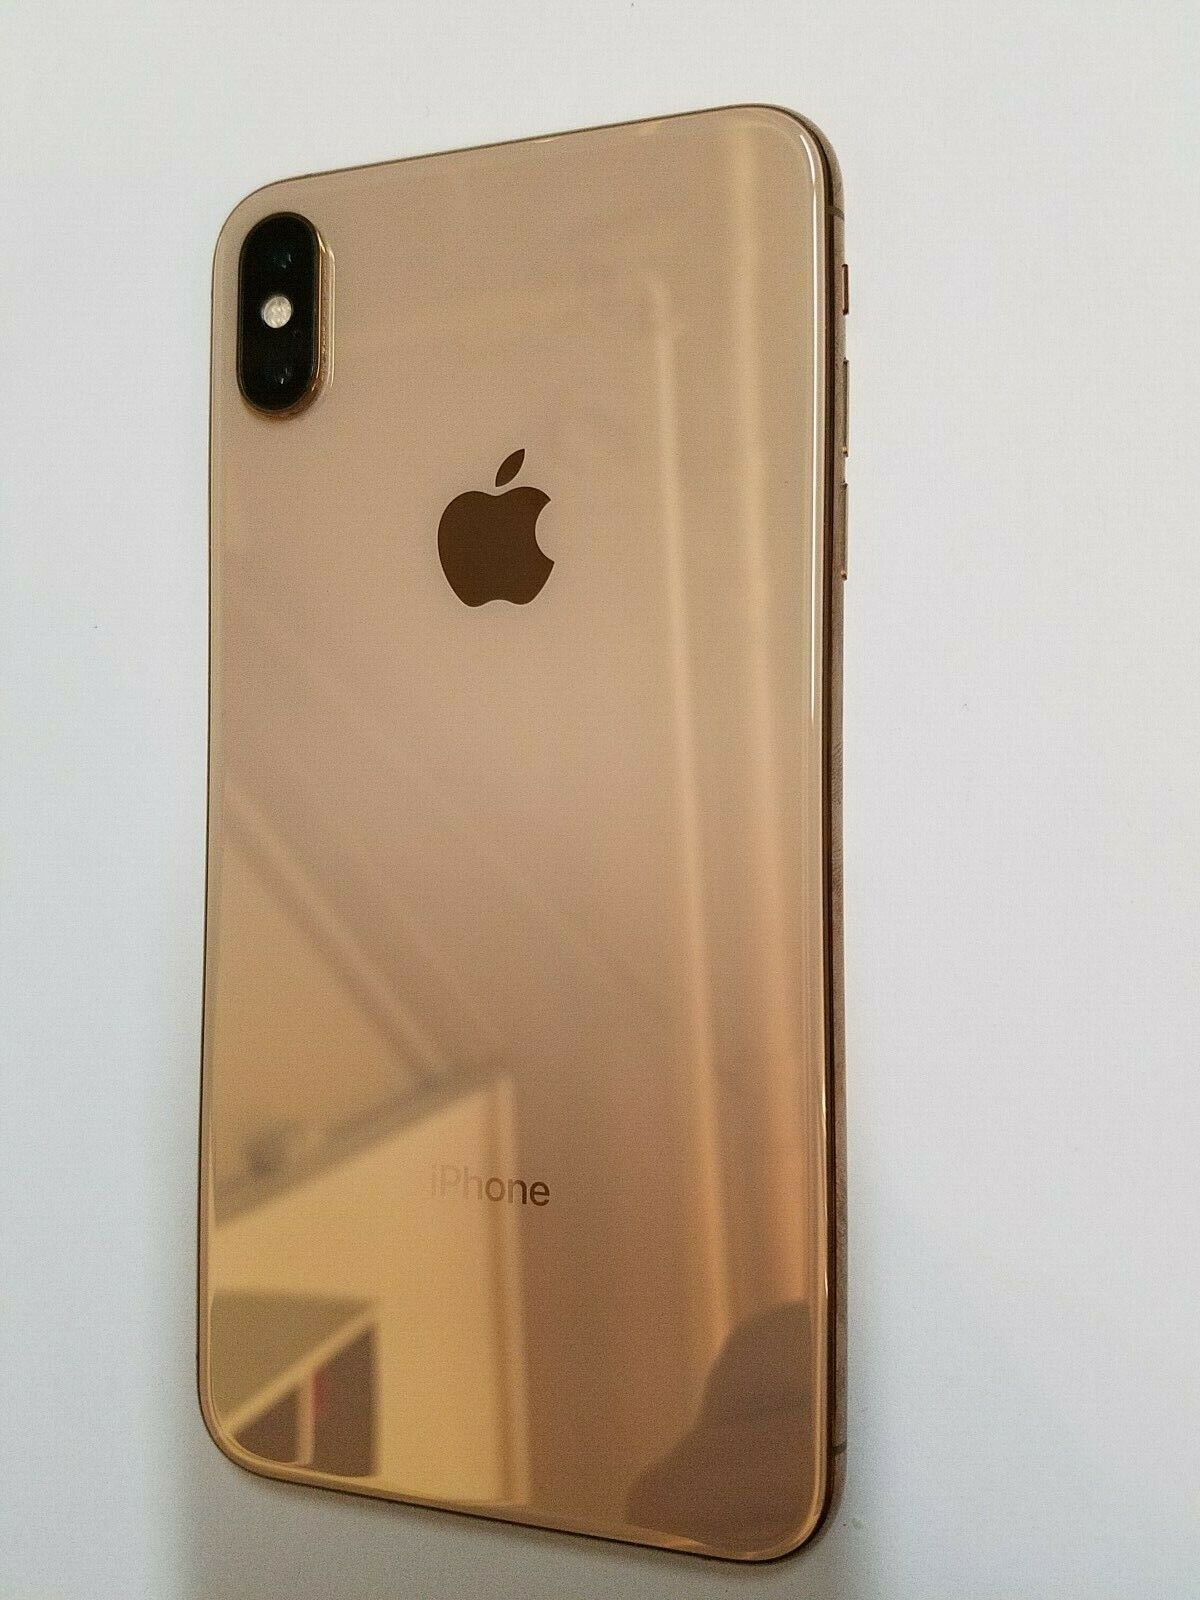 Genuine Iphone XS Max Gold Mid Frame Back Cover Camera Housing 